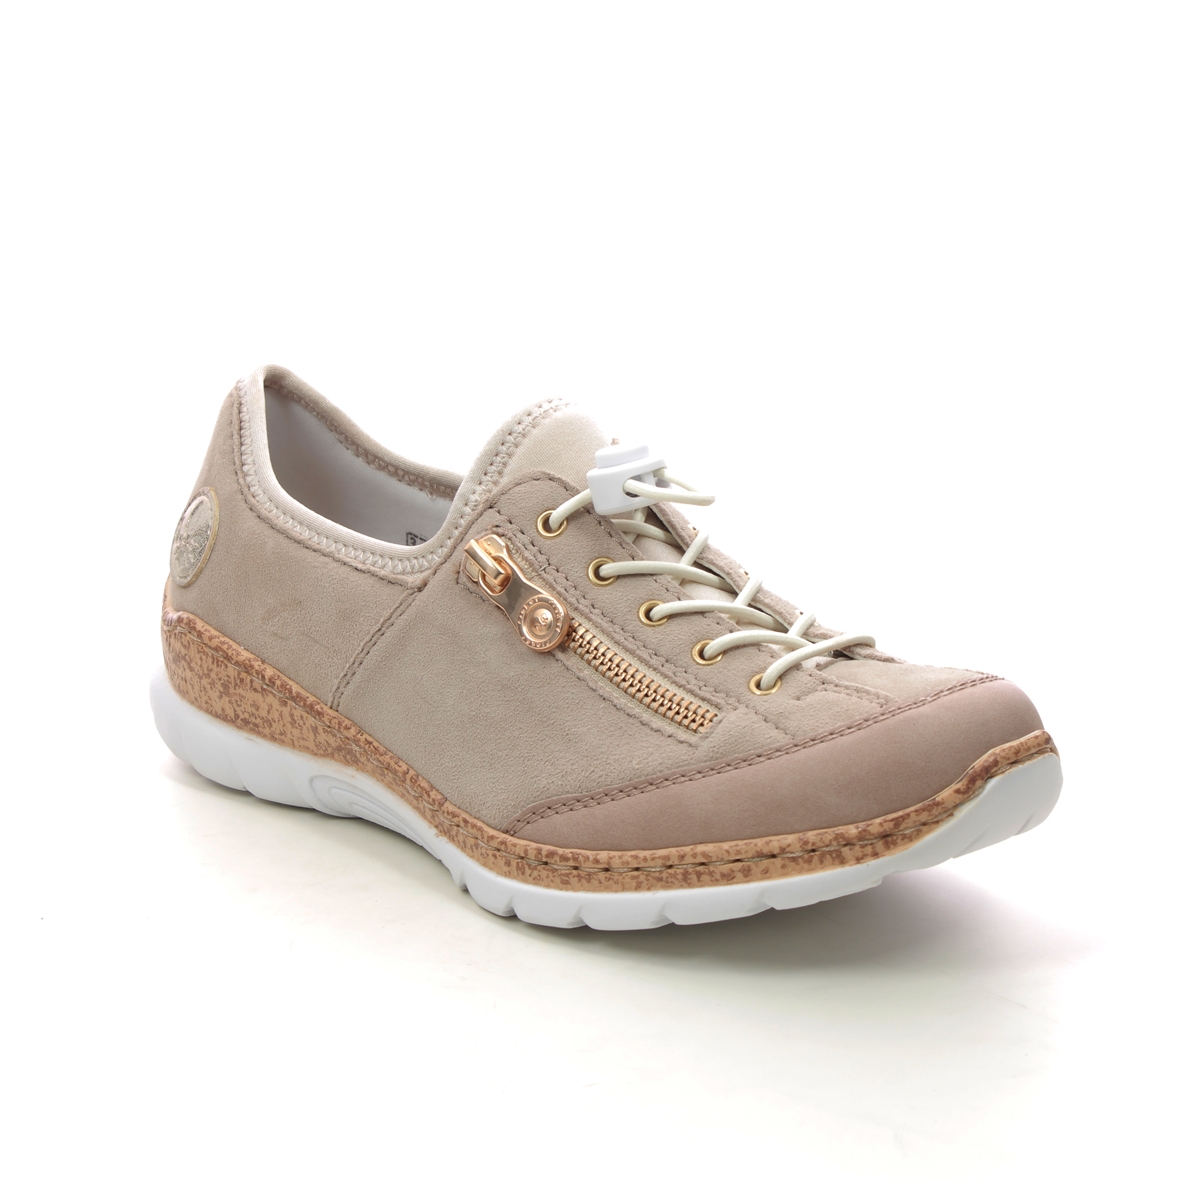 Rieker N42F1-60 Nude Suede Womens lacing shoes in a Plain Leather in Size 42